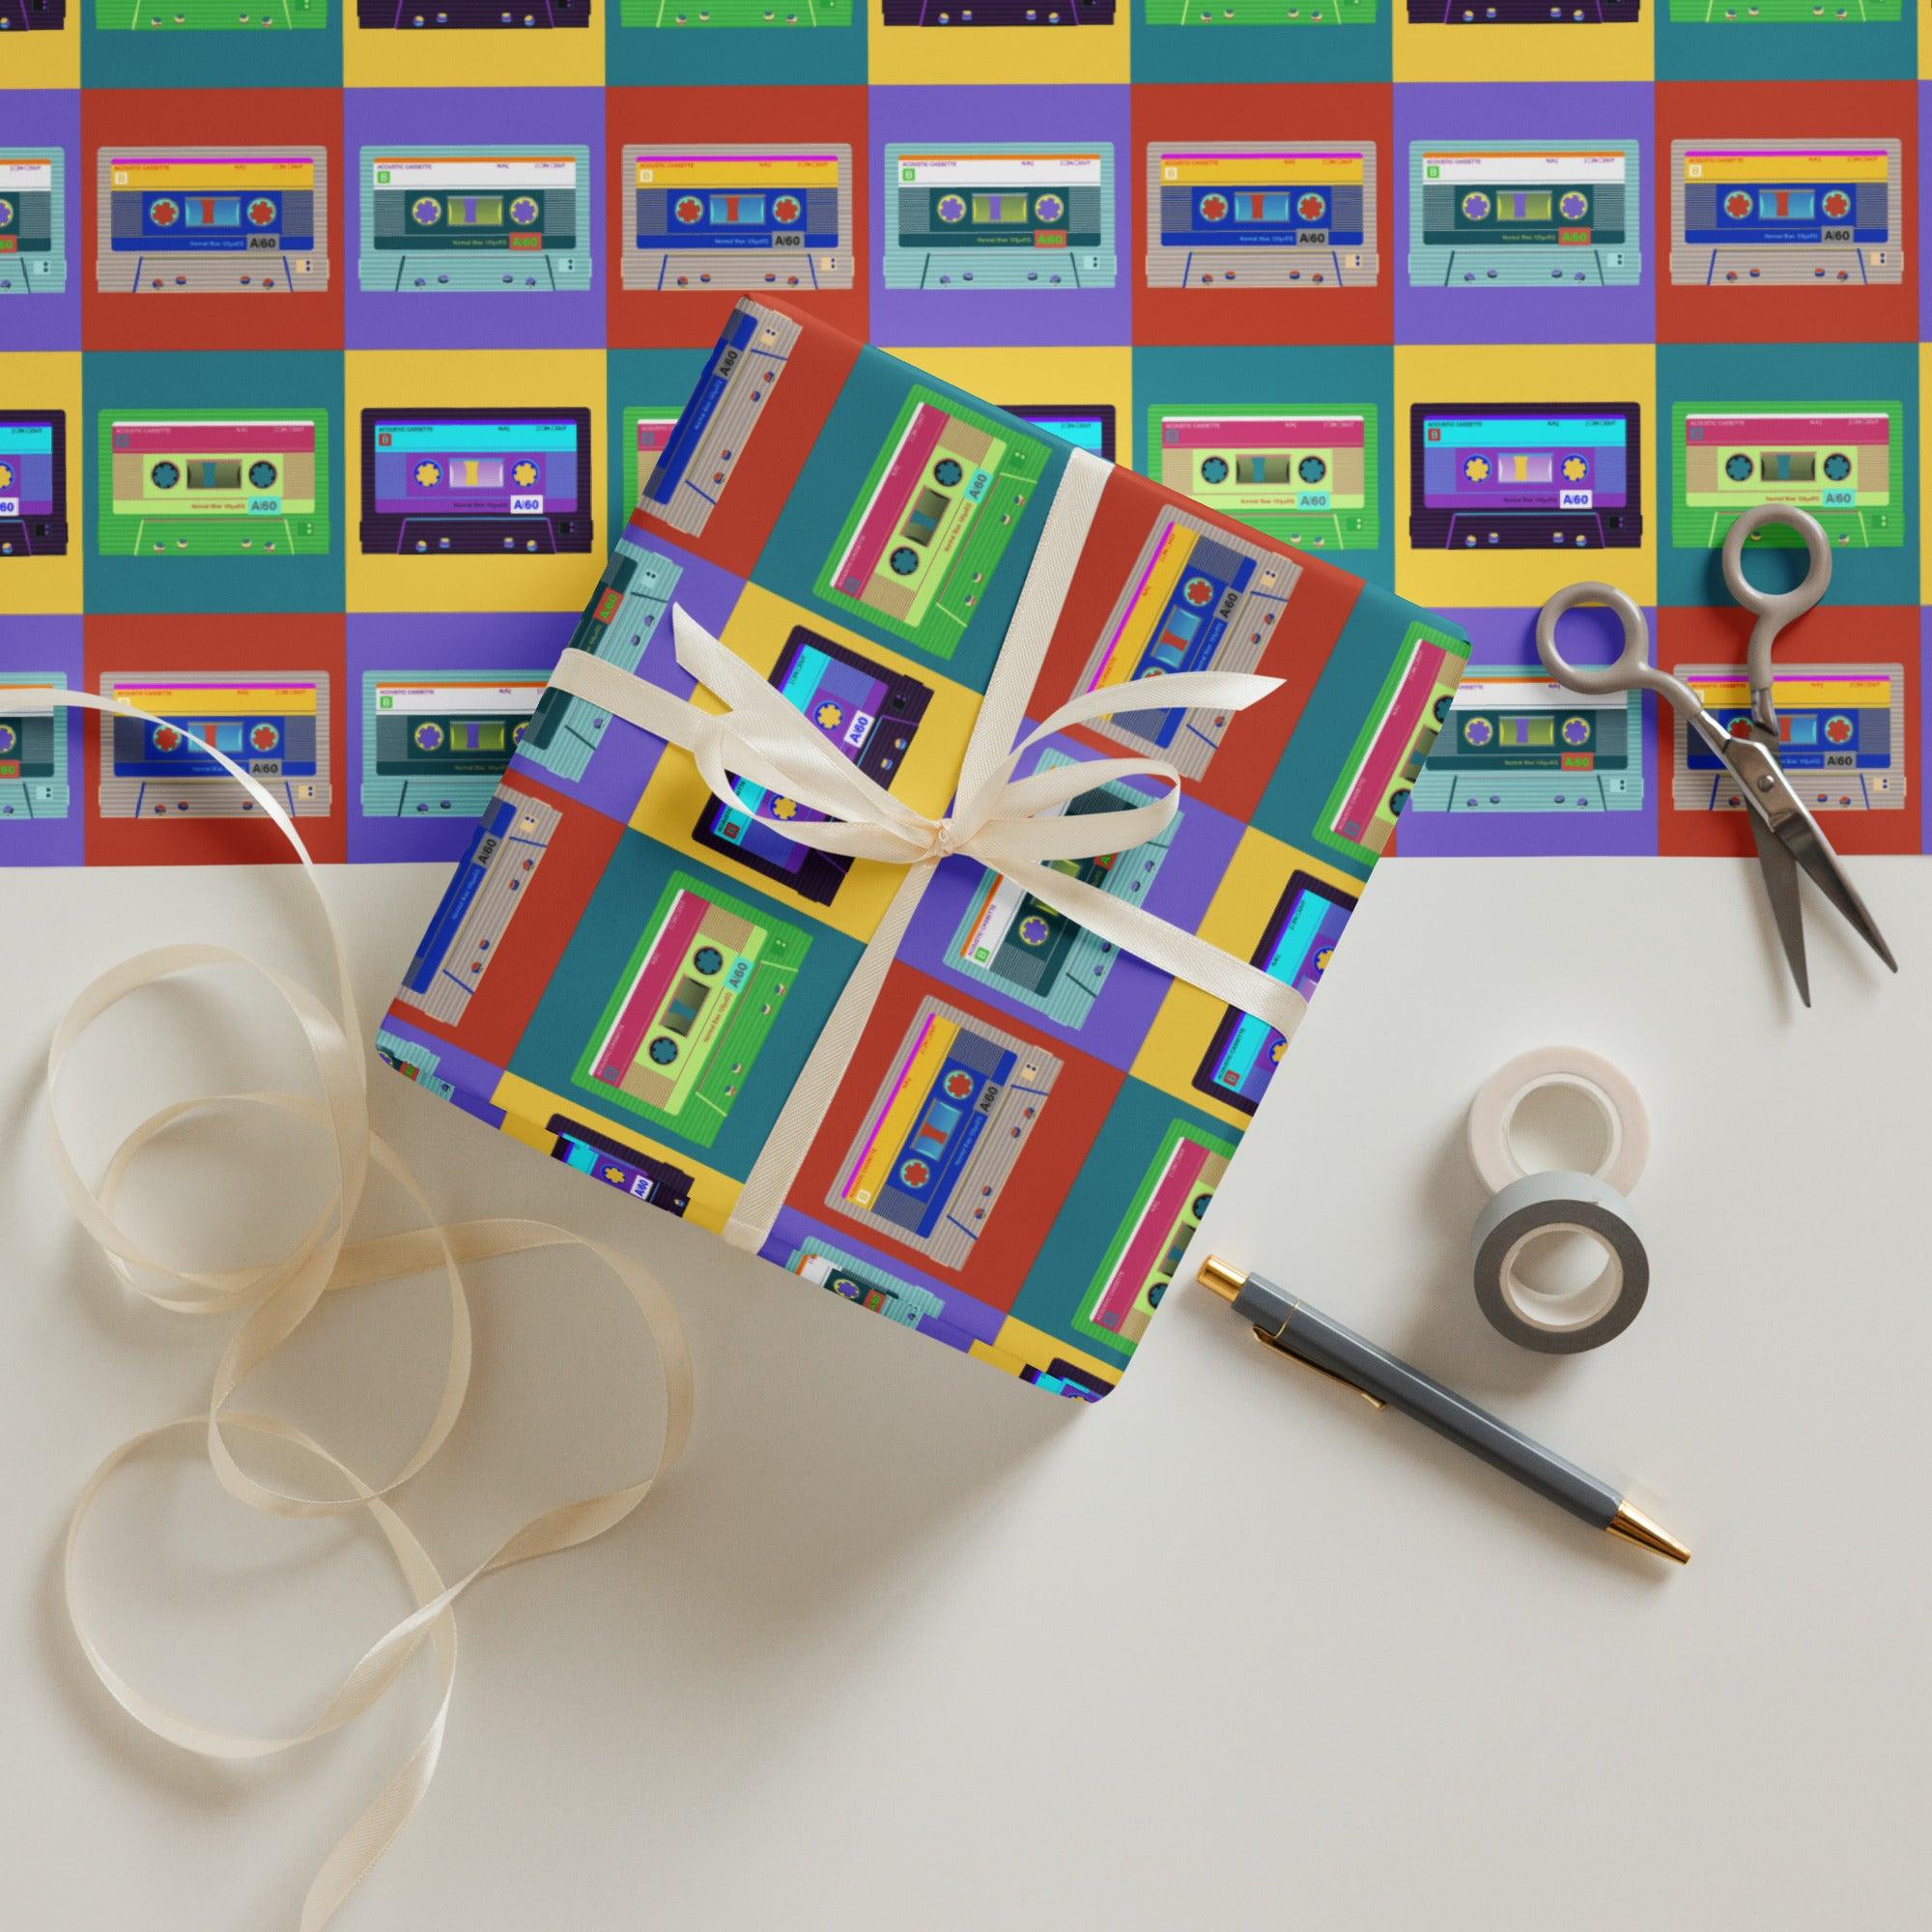 Vintage Cassette Tape | Andy Warhol Style Pop Art Wrapping Paper Sheets (3 rolls) - Tedeschi Studio, LLC.